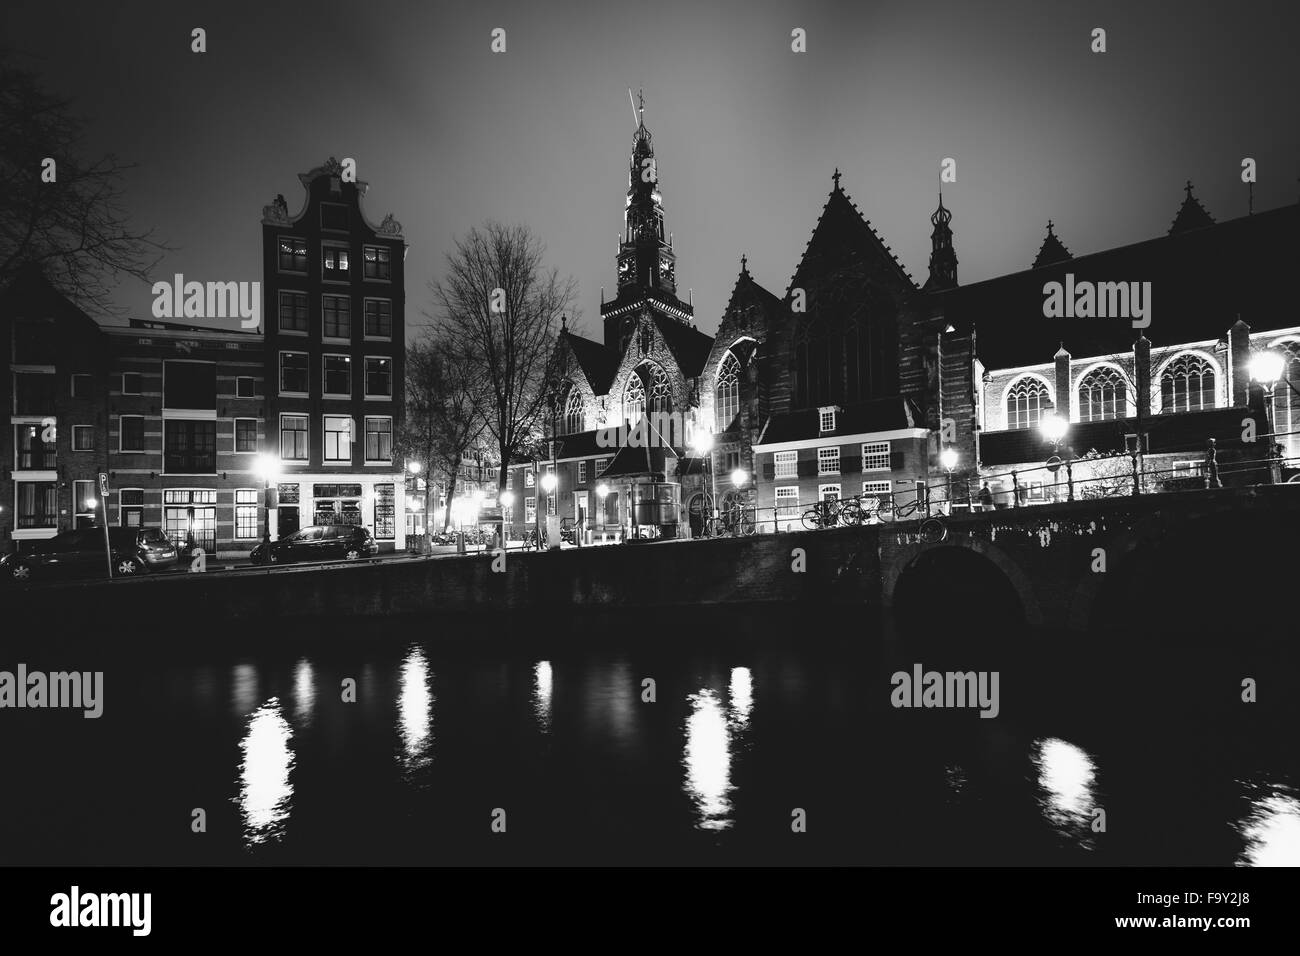 The Oude Church and a canal at night, in Amsterdam, The Netherlands. Stock Photo